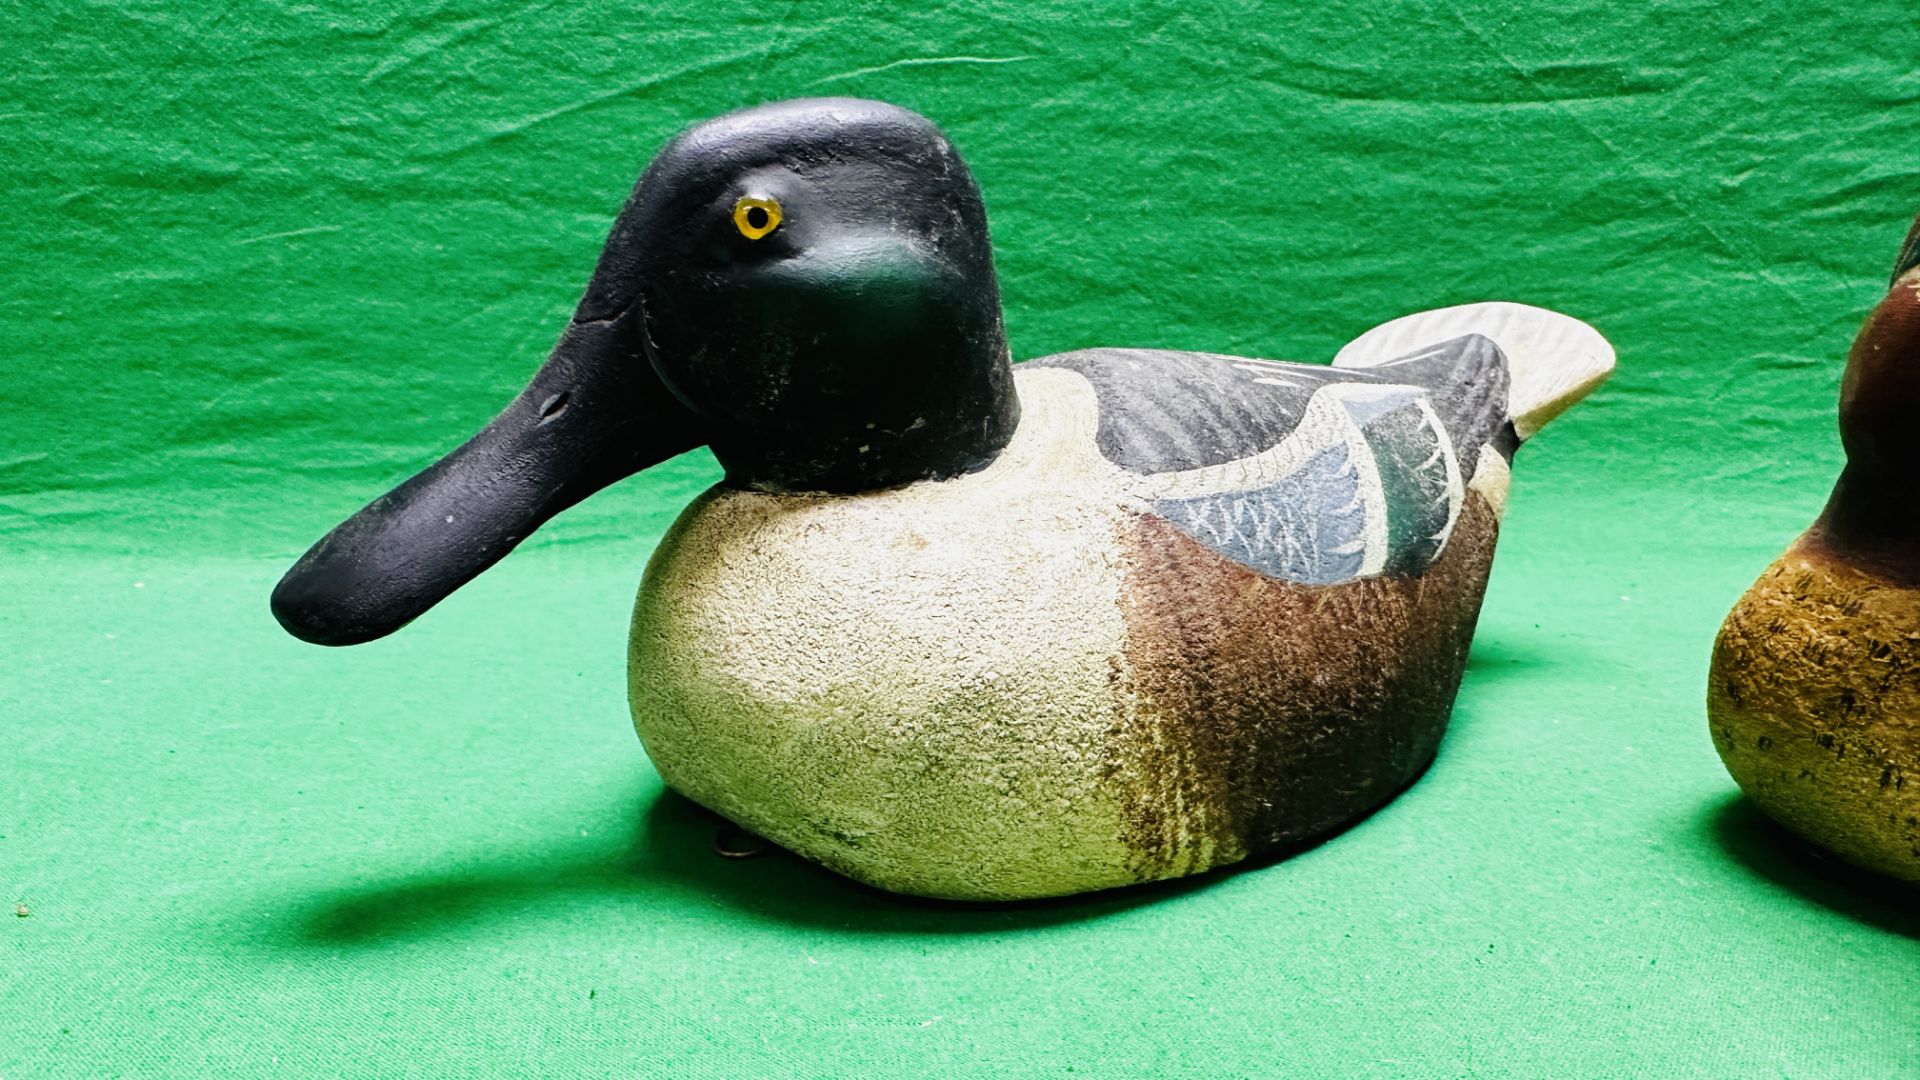 A HANDCRAFTED SET OF 4 DUCK DECOYS HAVING HANDPAINTED DETAIL AND GLASS EYES. - Image 4 of 13